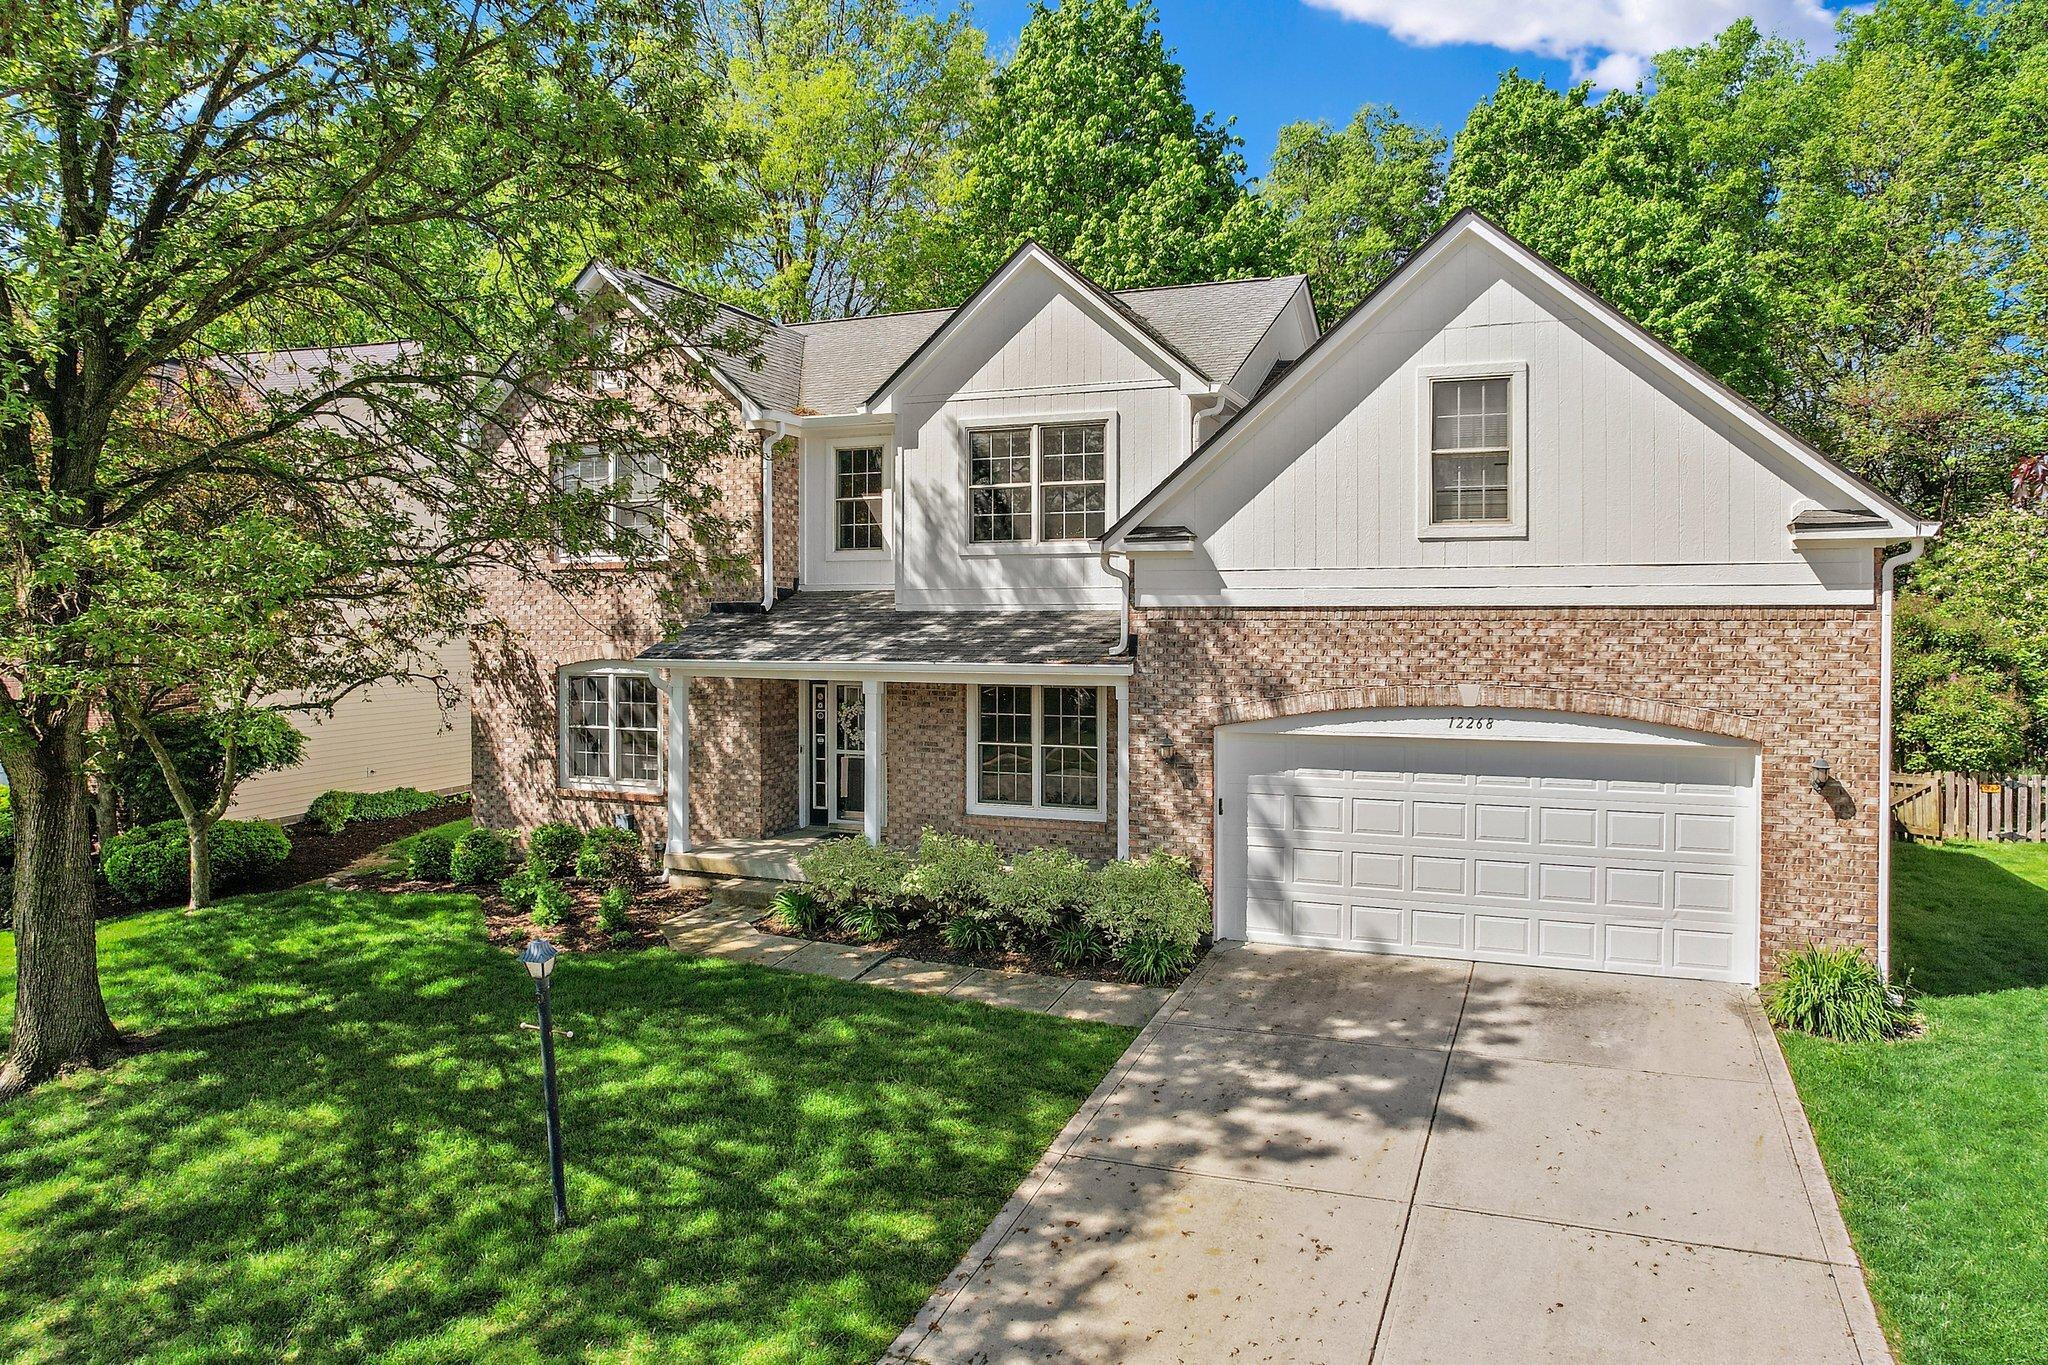 Photo one of 12268 Cobblestone Dr Fishers IN 46037 | MLS 21976418